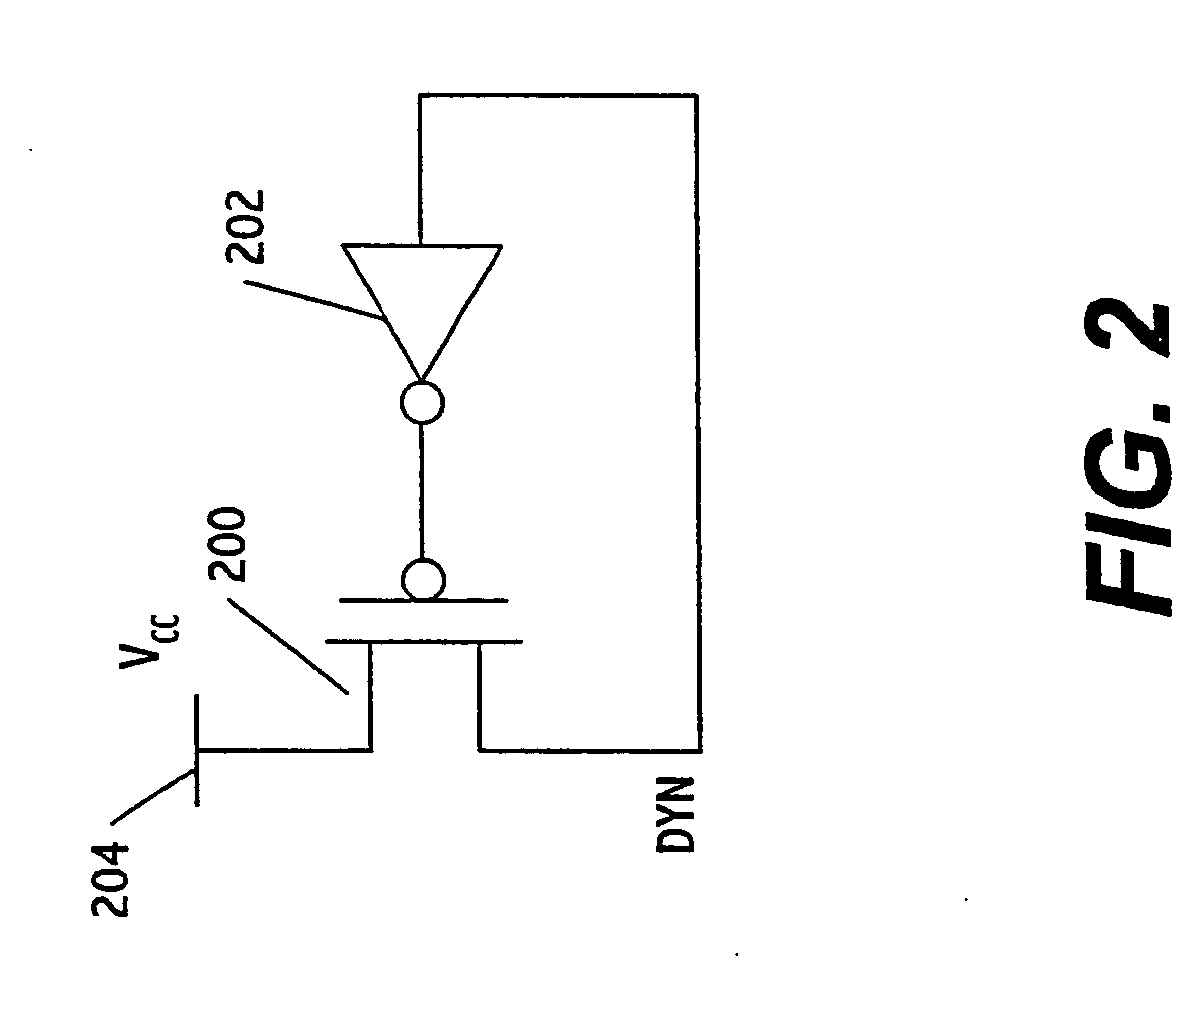 Current mirror multi-channel leakage current monitor circuit and method